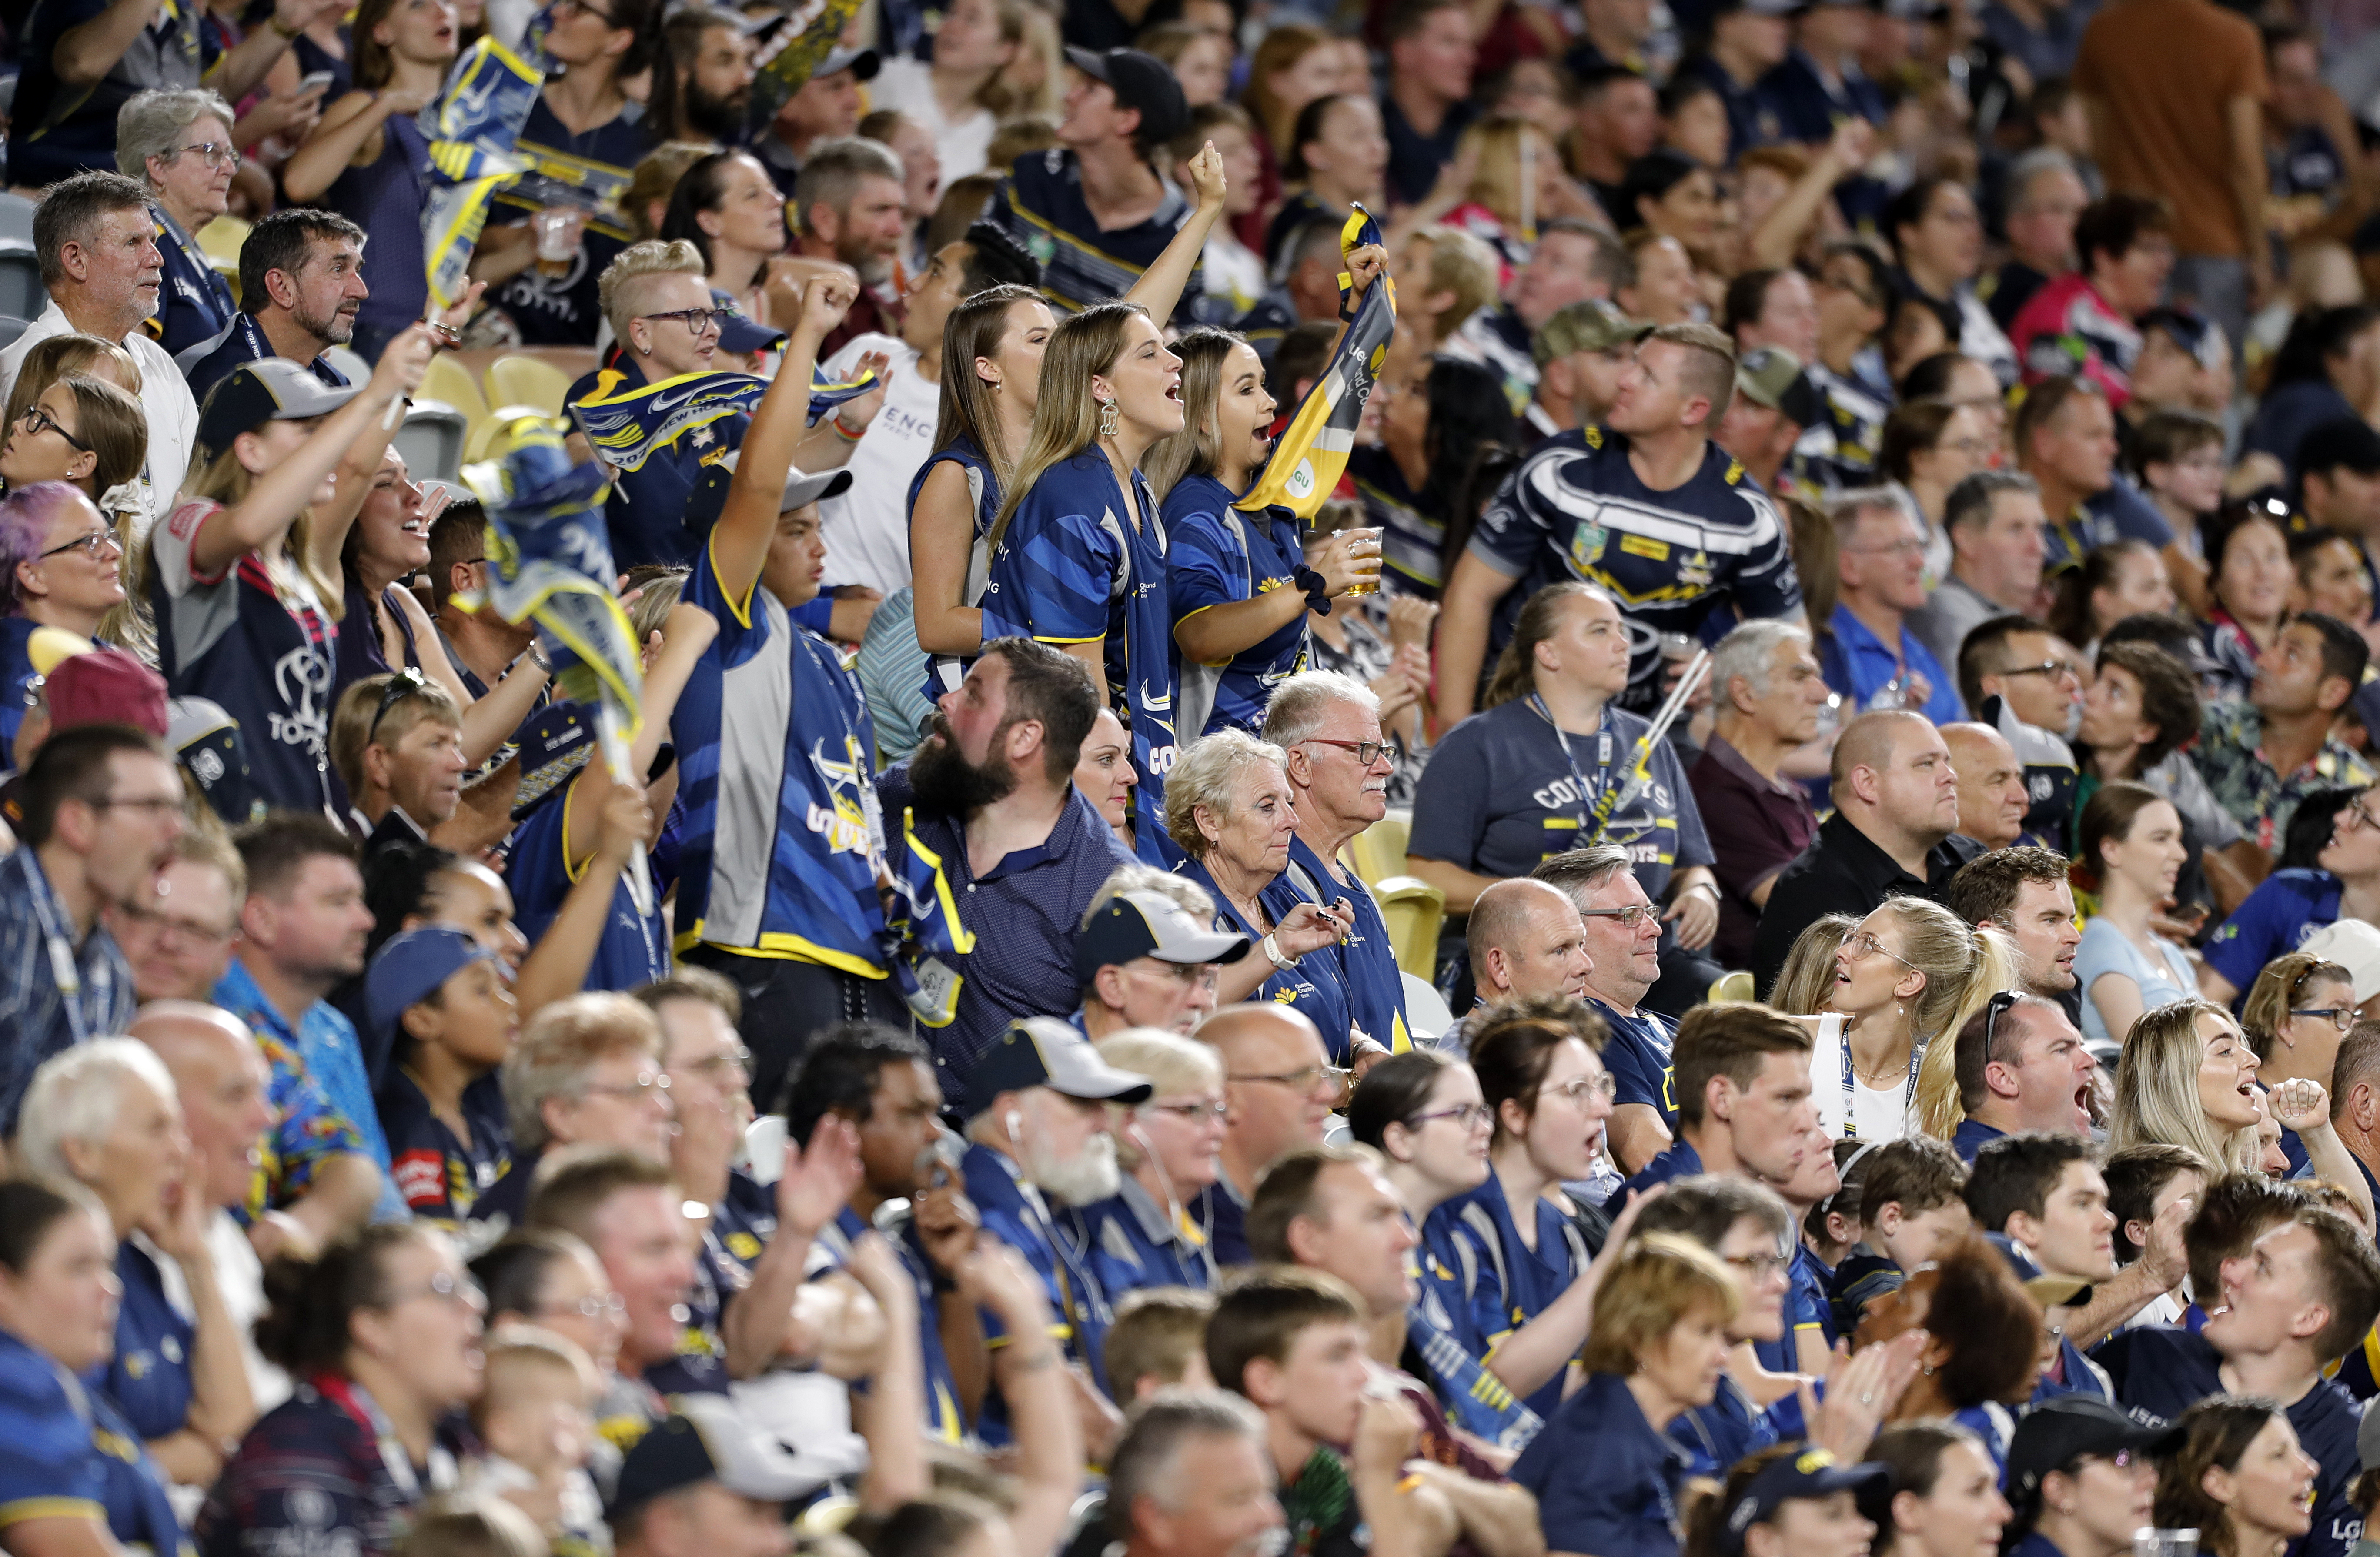 Spectators look on during the Round One NRL match at North Queensland Stadium.